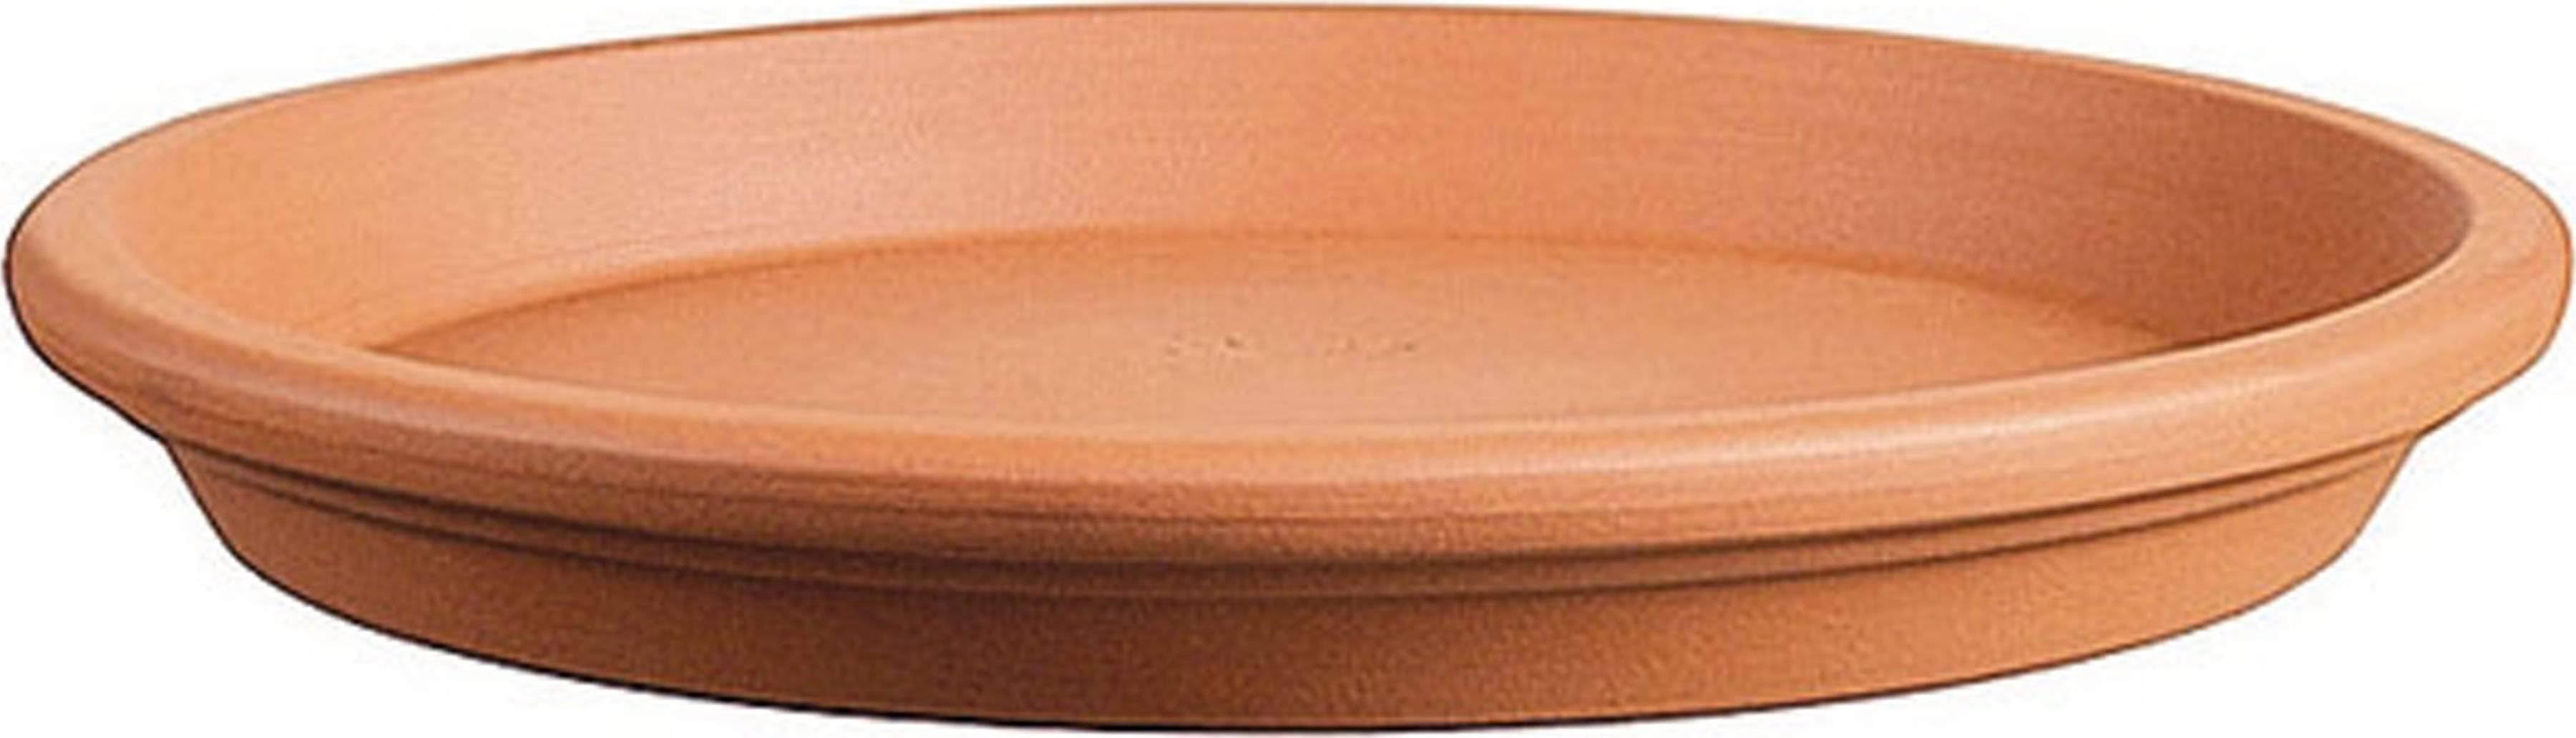 Southern Patio TC0612SR 6 in. Clay Saucer, Terra Cotta